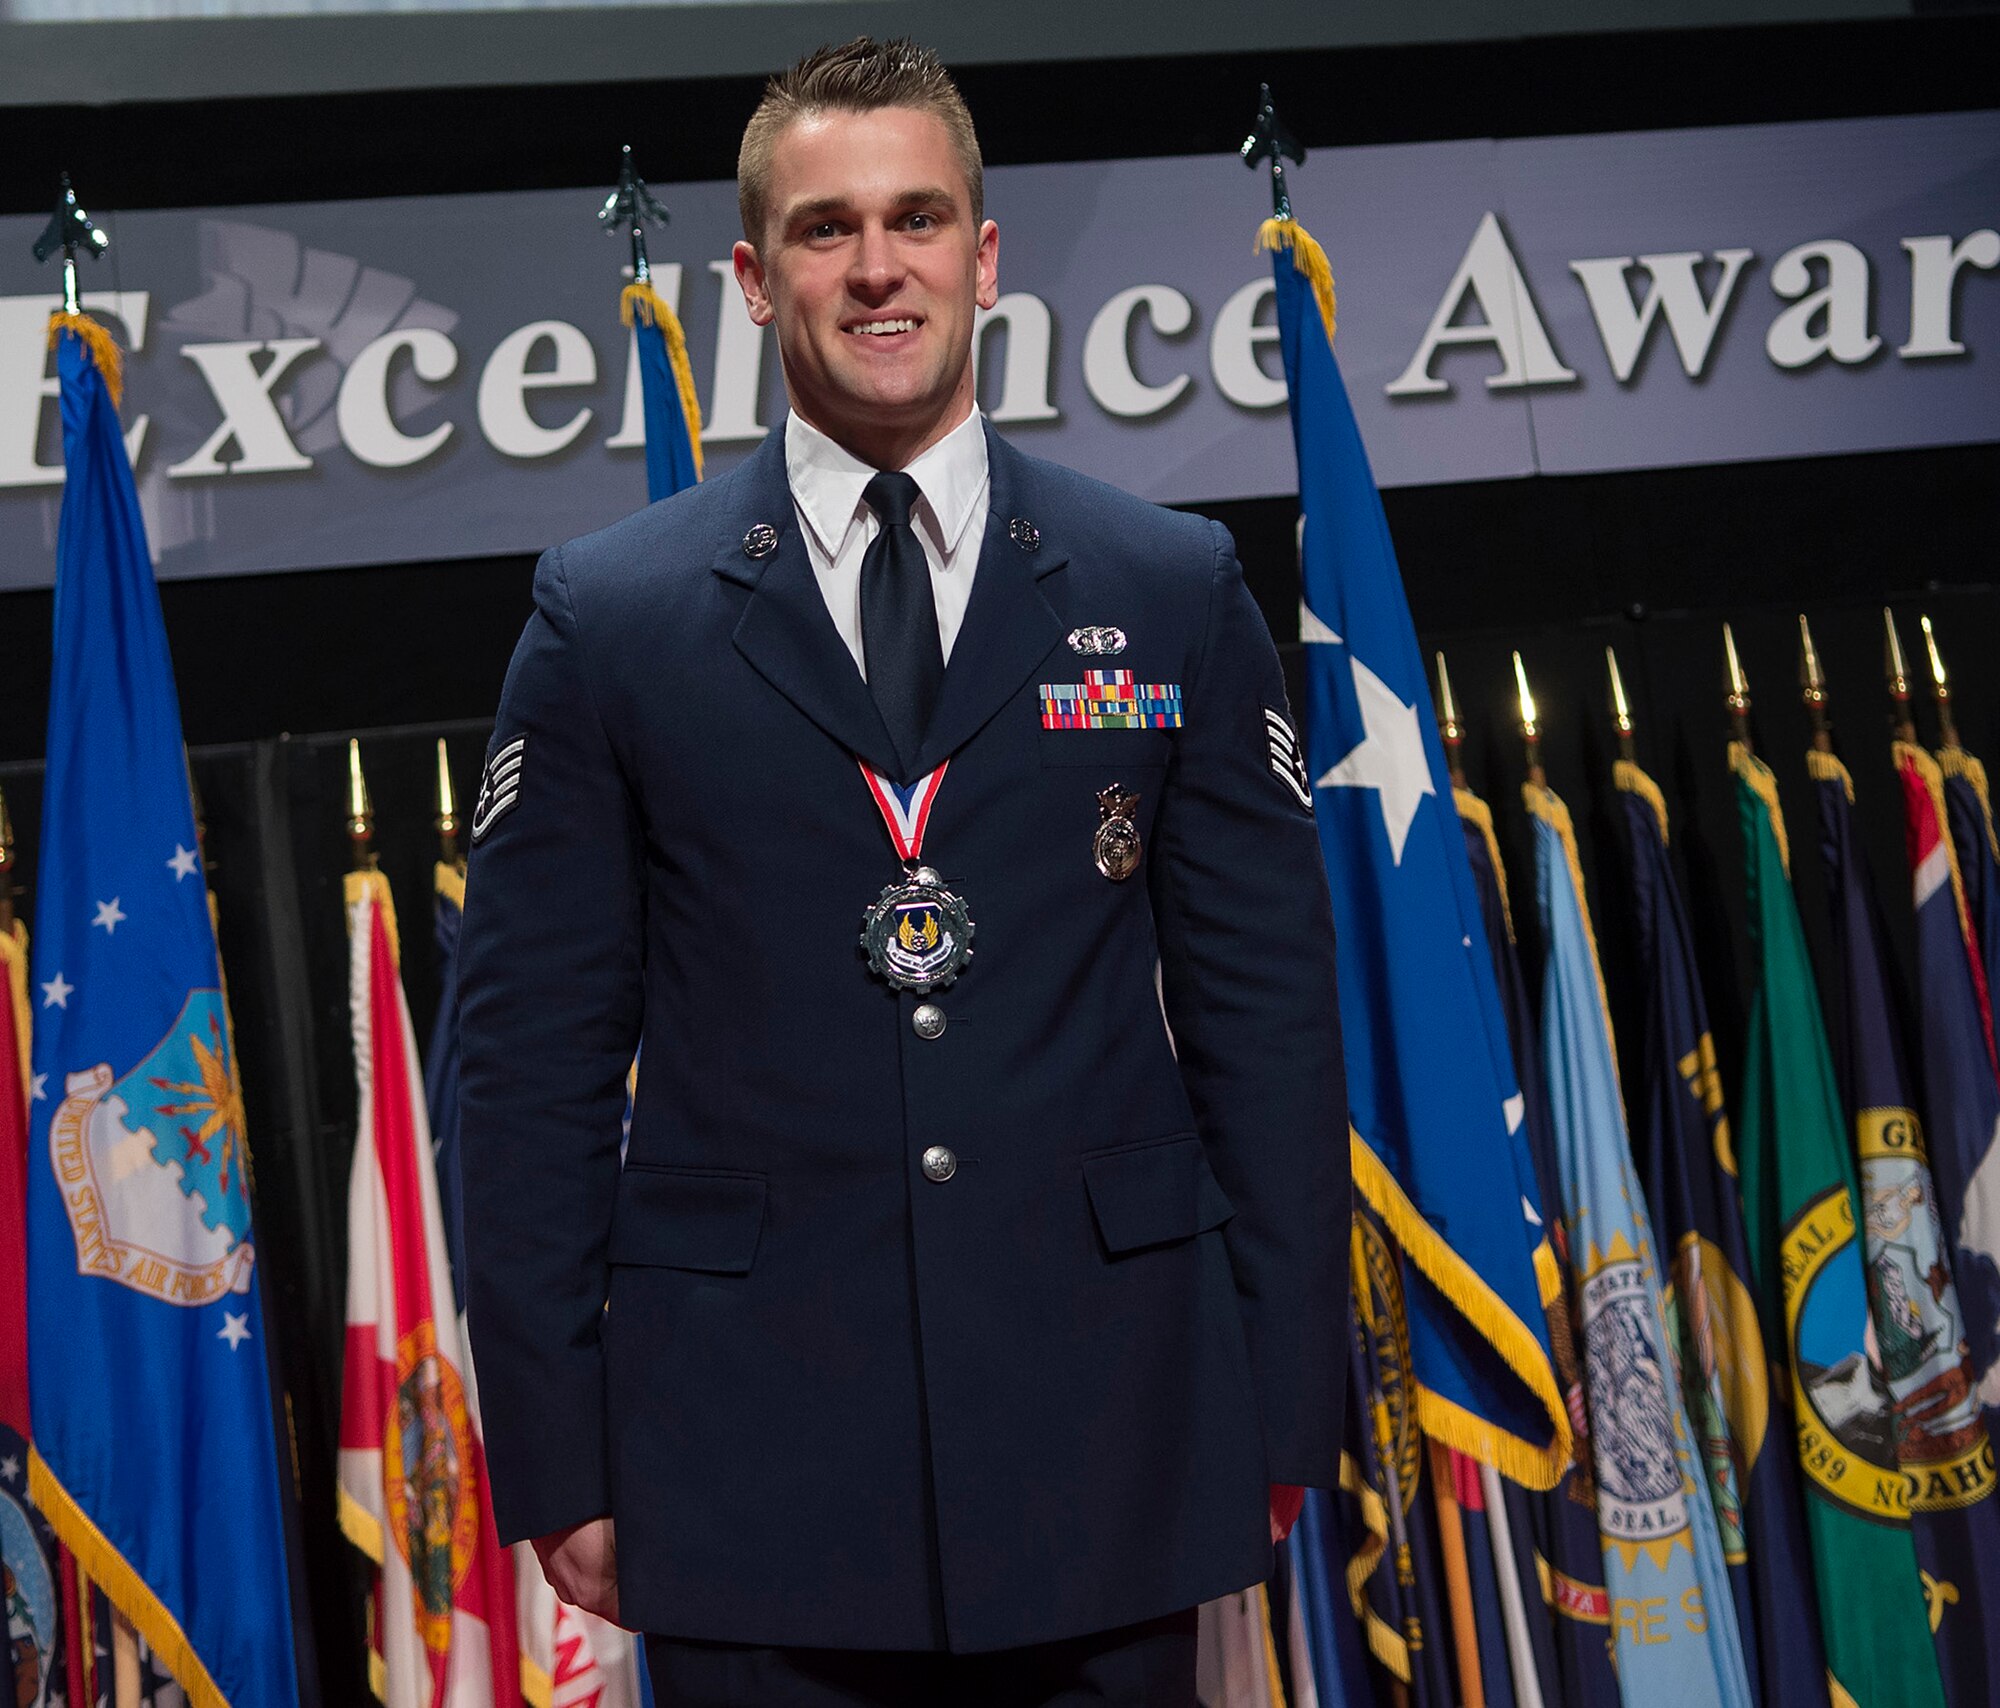 Congrats to Staff Sgt. Nathan Koenig, Air Force Test Center, on his selection as the Airman of the Year for Air Force Materiel Command.  (U.S. Air Force photo/Richard Oriez)